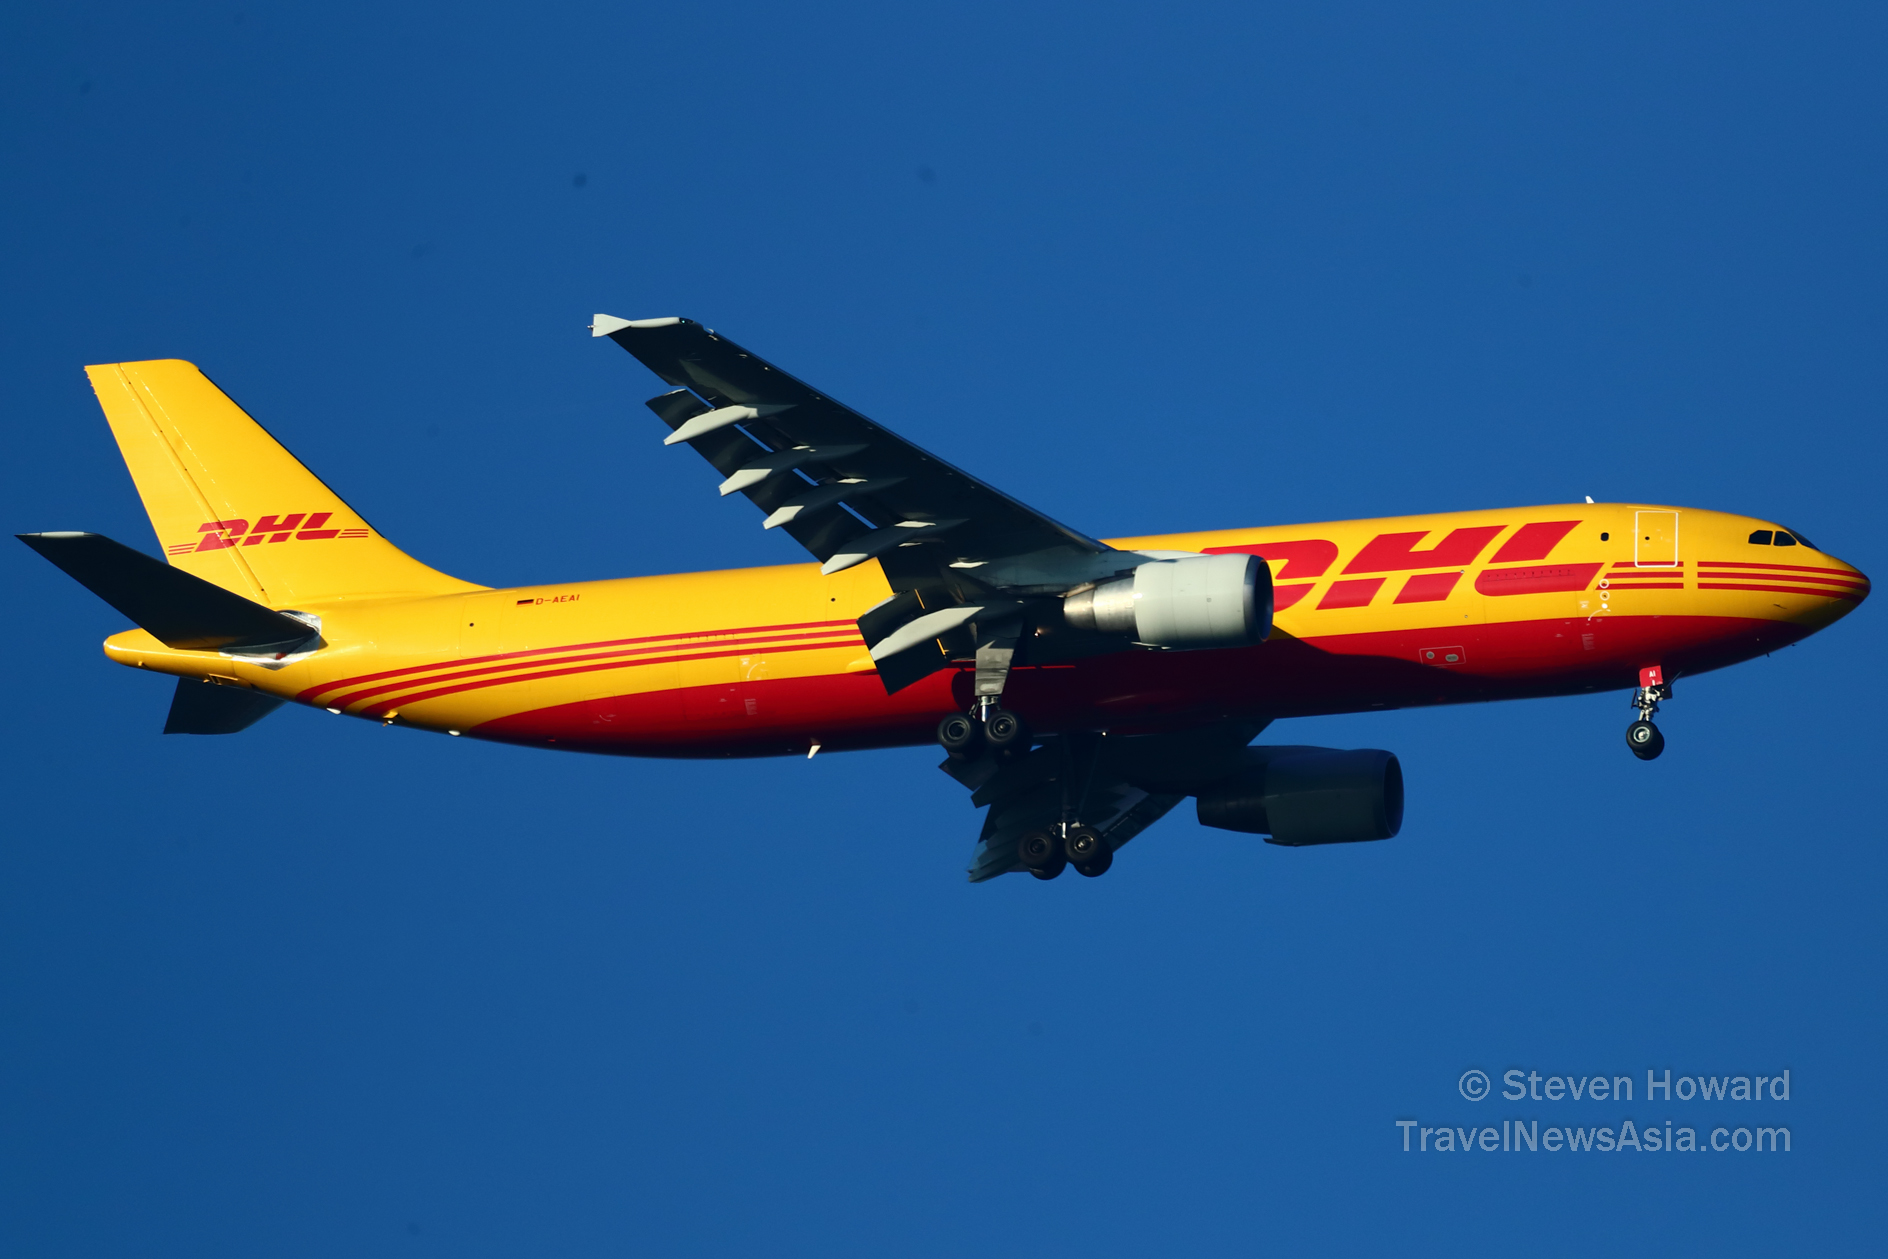 DHL A300 reg: D-AEAI. Picture by Steven Howard of TravelNewsAsia.com Click to enlarge.